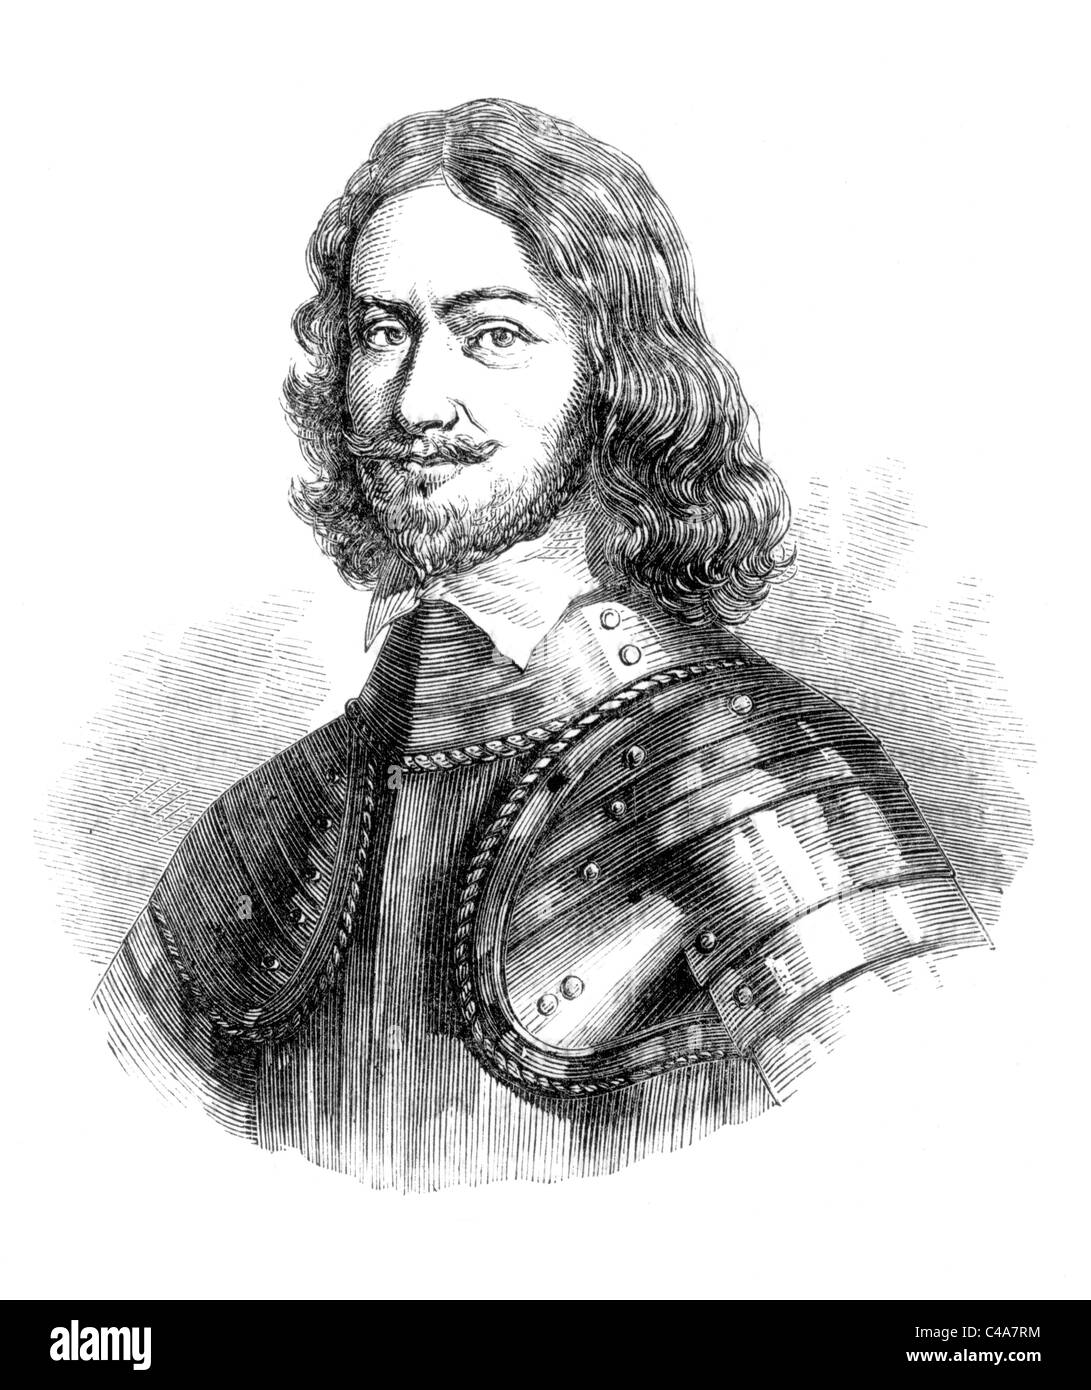 General Henry Ireton (1611-1651) English Parliamentarian &soldier during the English Civil Wars; Black and White Illustration Stock Photo